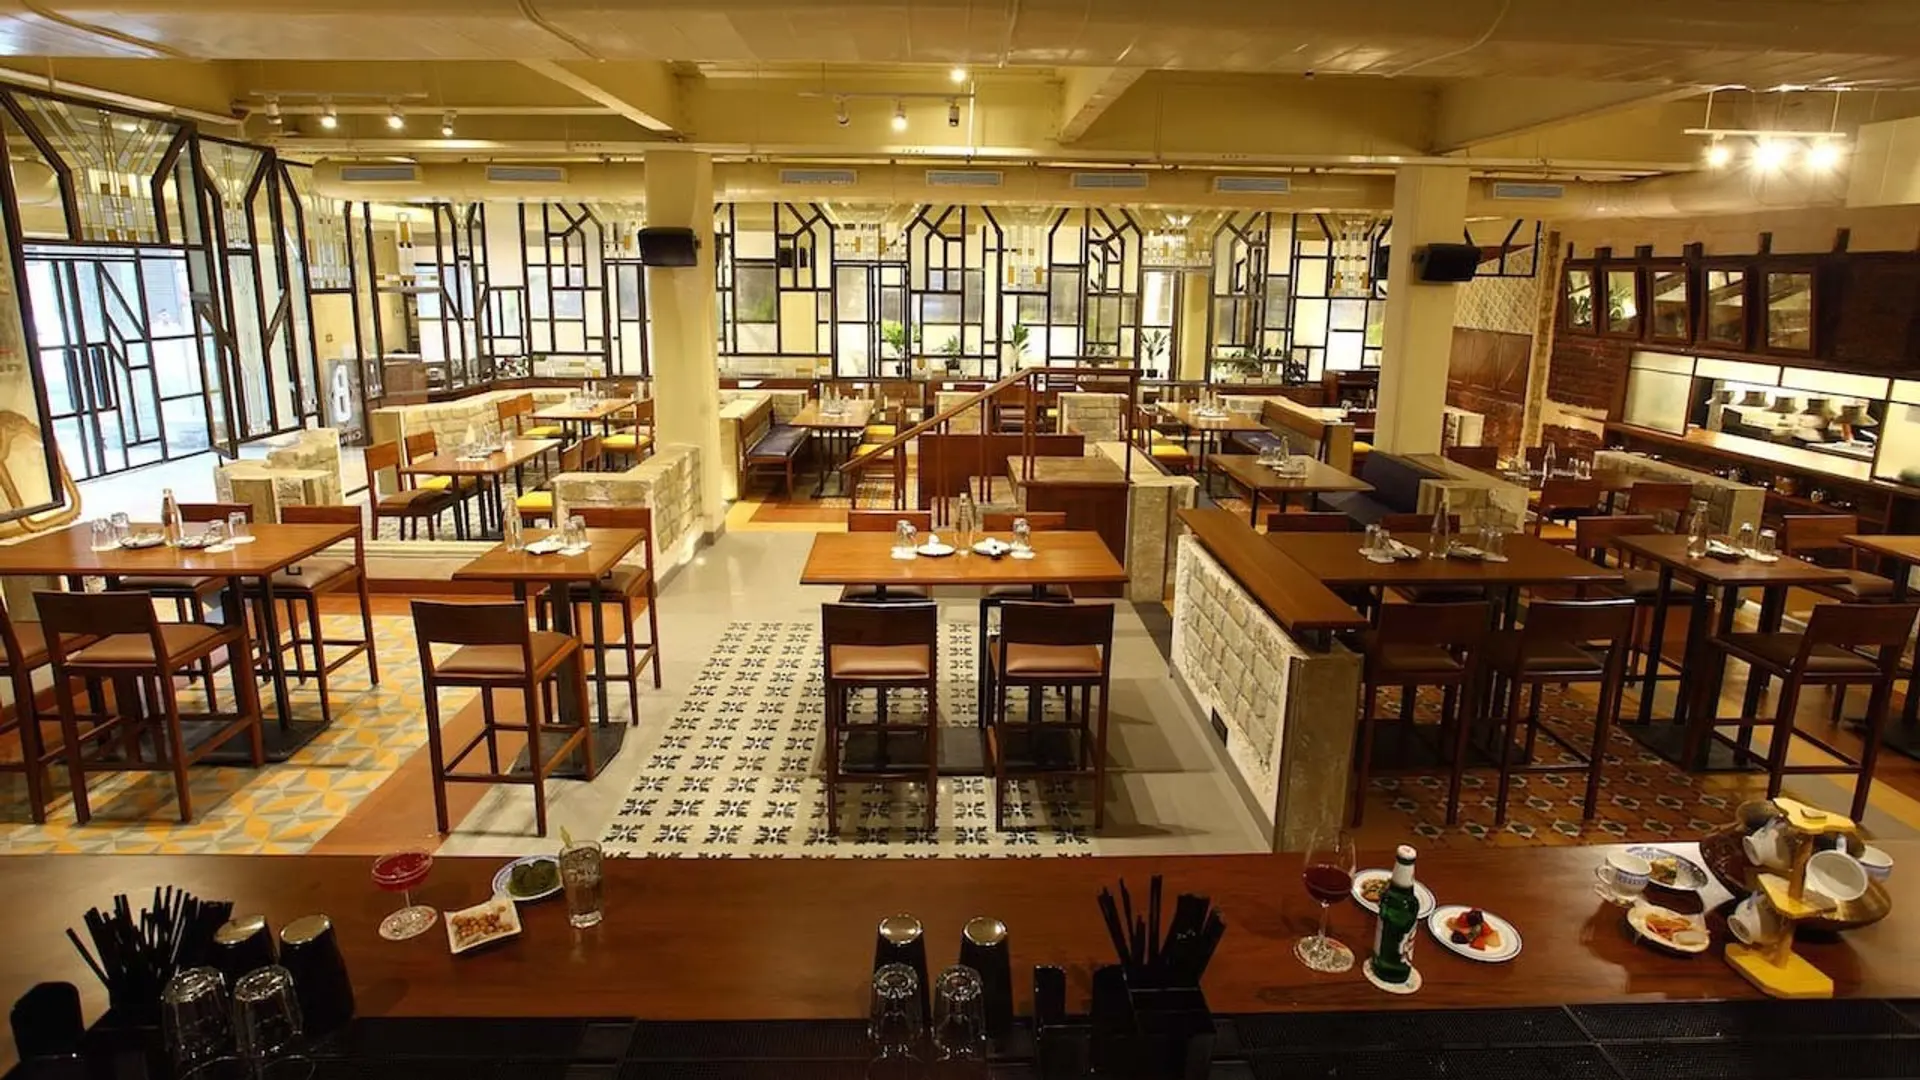 Bombay canteen with wooden furniture and white roof.